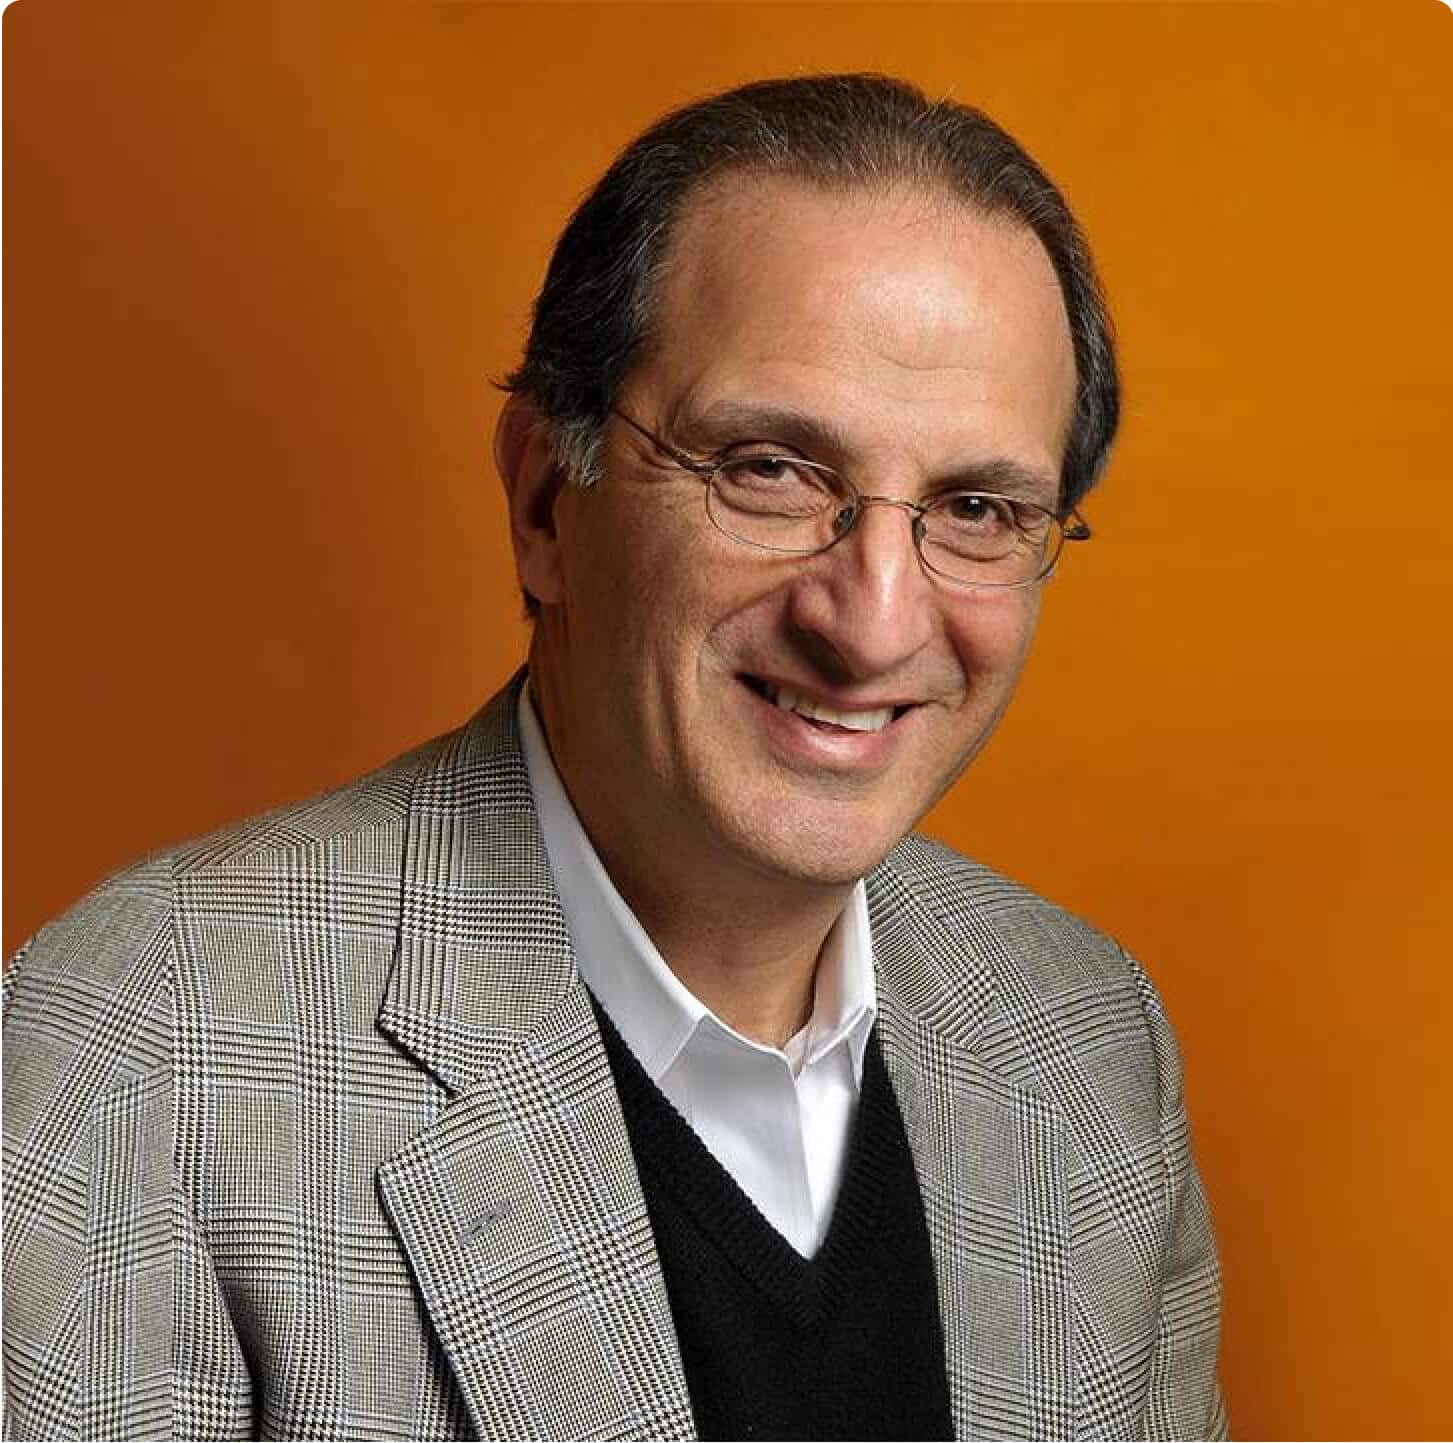 Dr. James Zogby